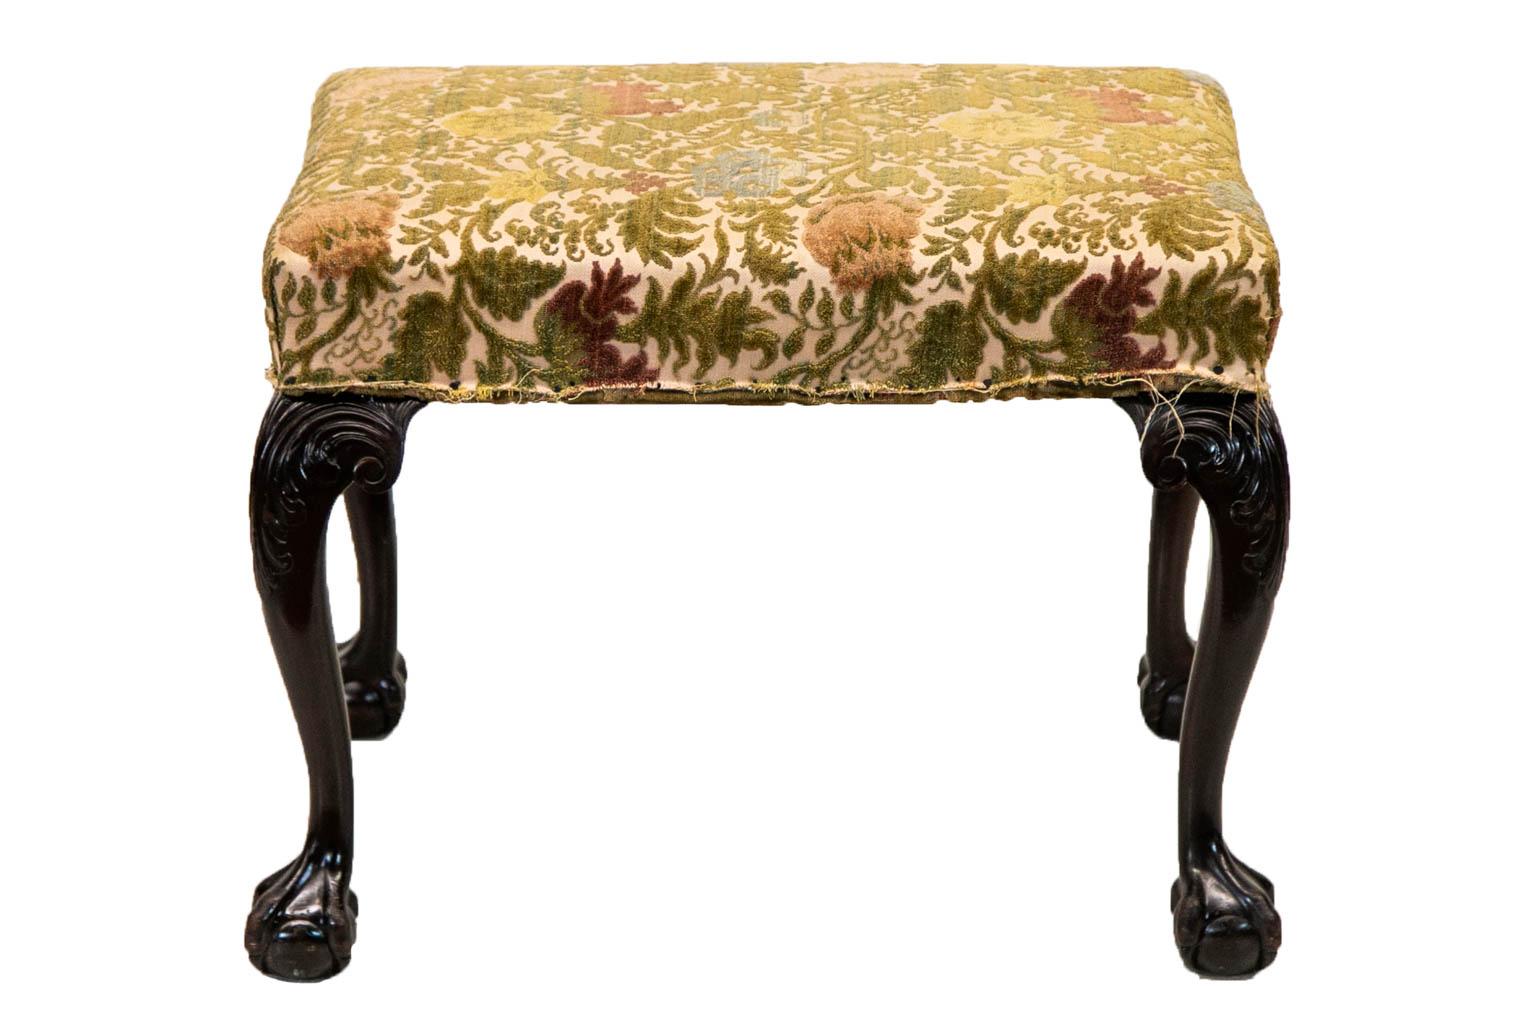 The cabriole legs of this stool are carved with acanthus leaves on the knees. The legs terminate in claw and ball feet. The upholstery is similar to crewel work and has some wear but is serviceable. There is no gimp edging.